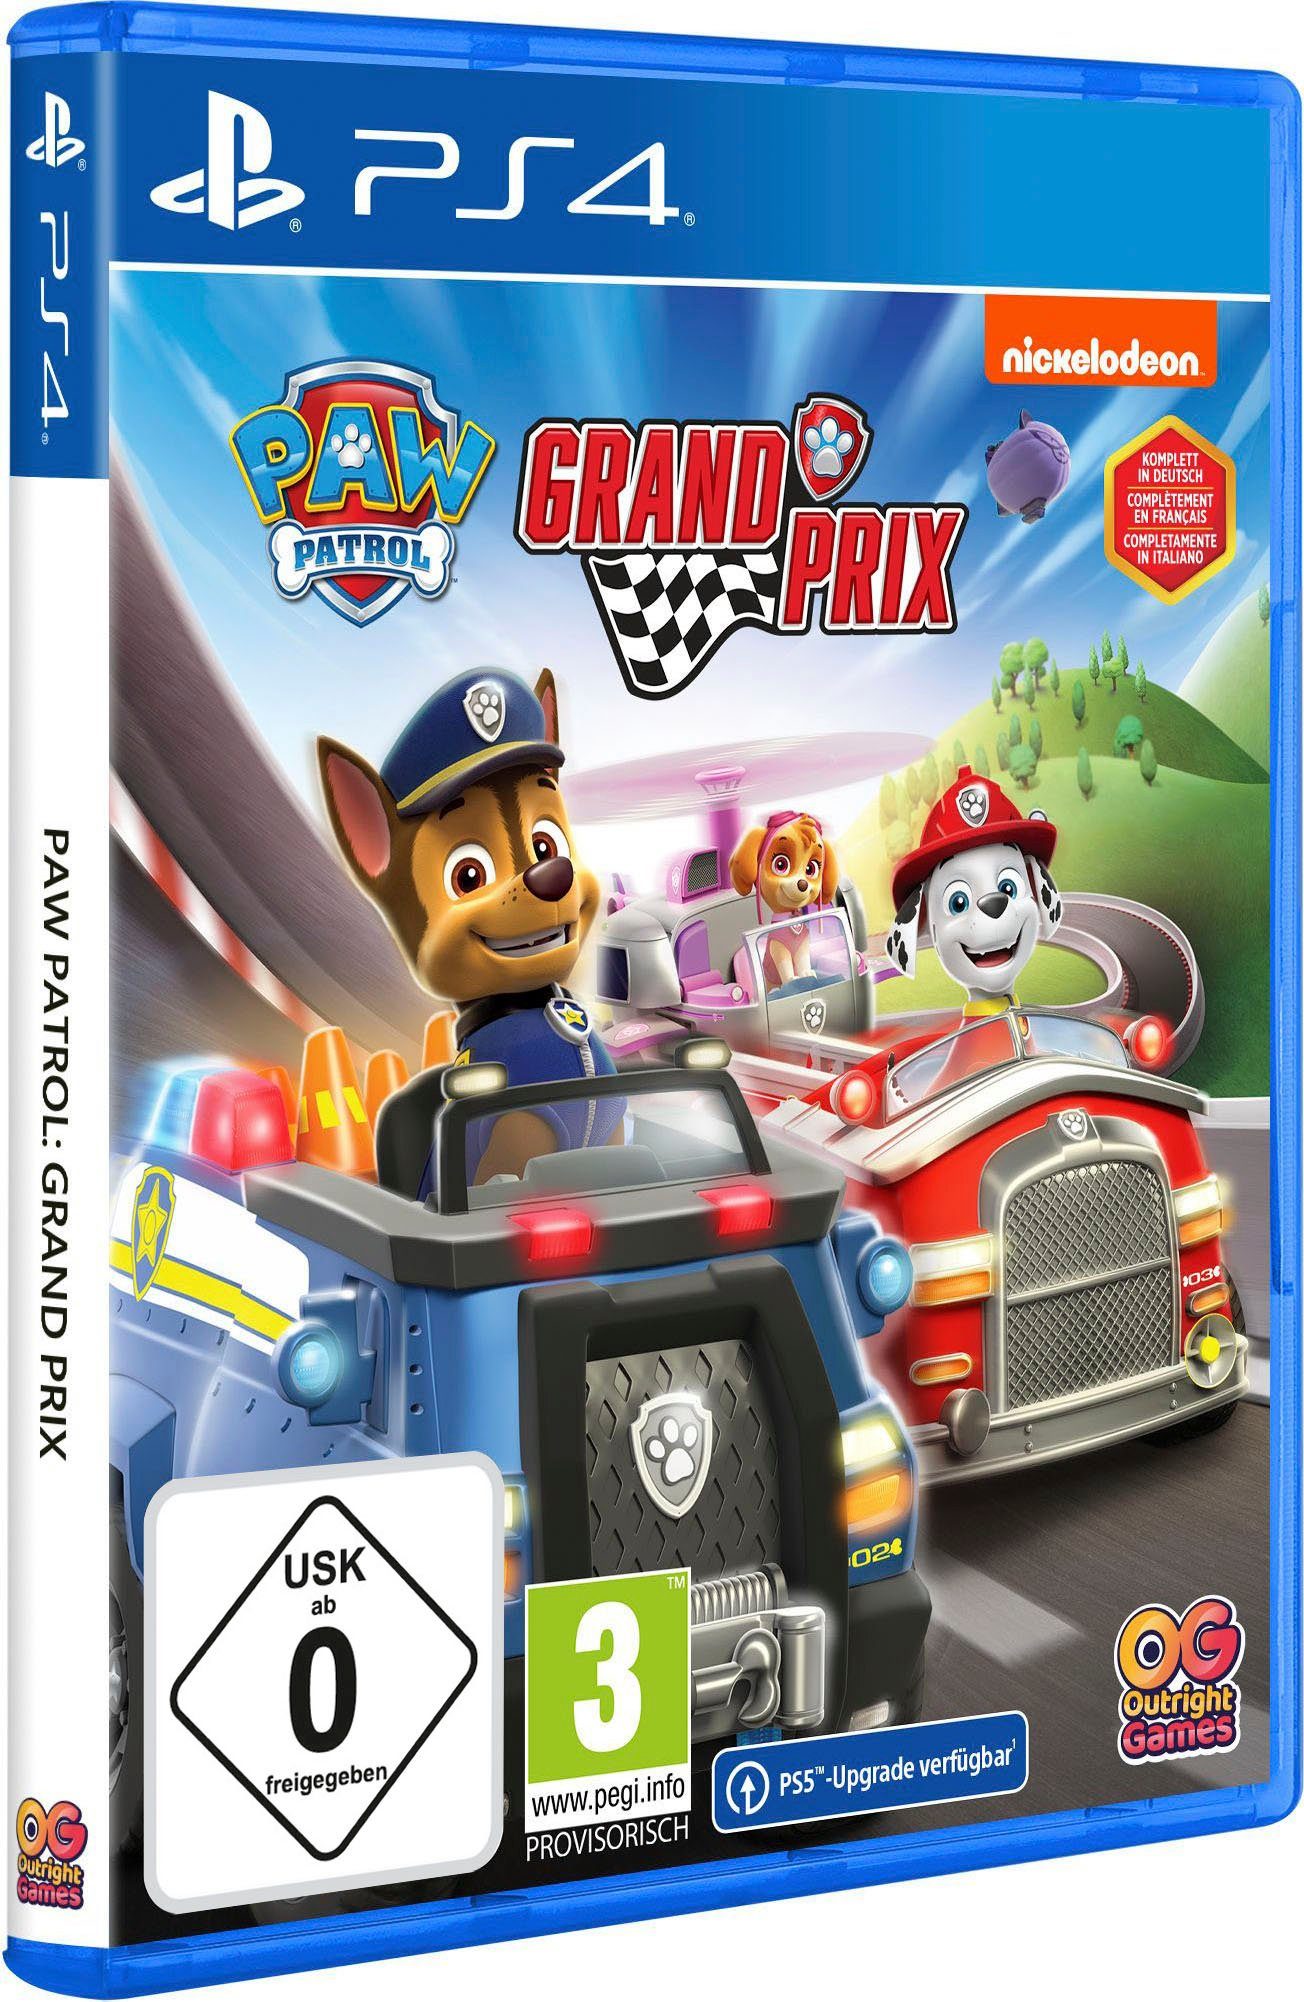 PlayStation 4 Outright Patrol: Grand Prix Paw Games